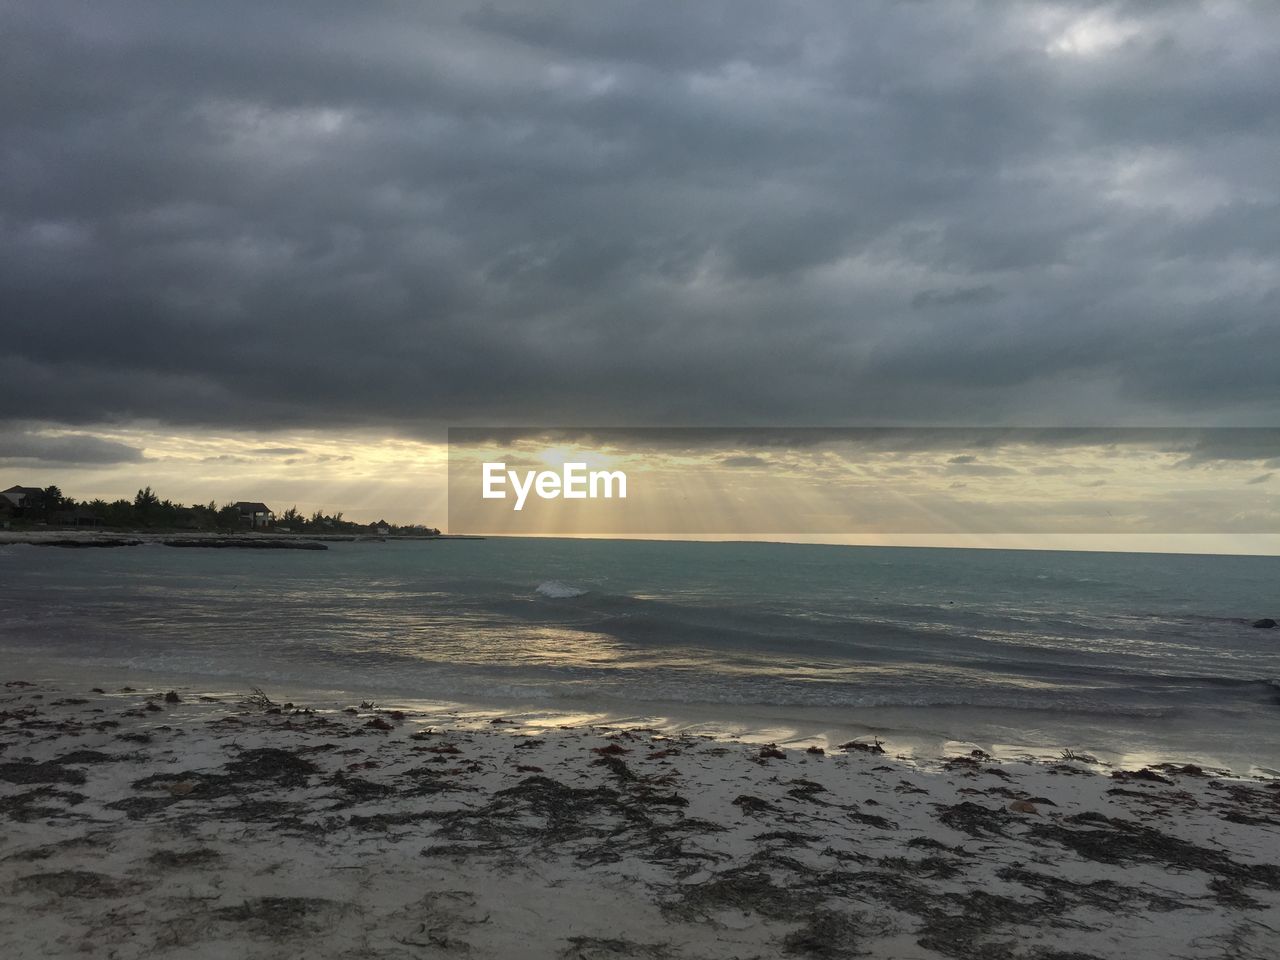 SCENIC VIEW OF SEA AGAINST CLOUDY SKY DURING SUNSET